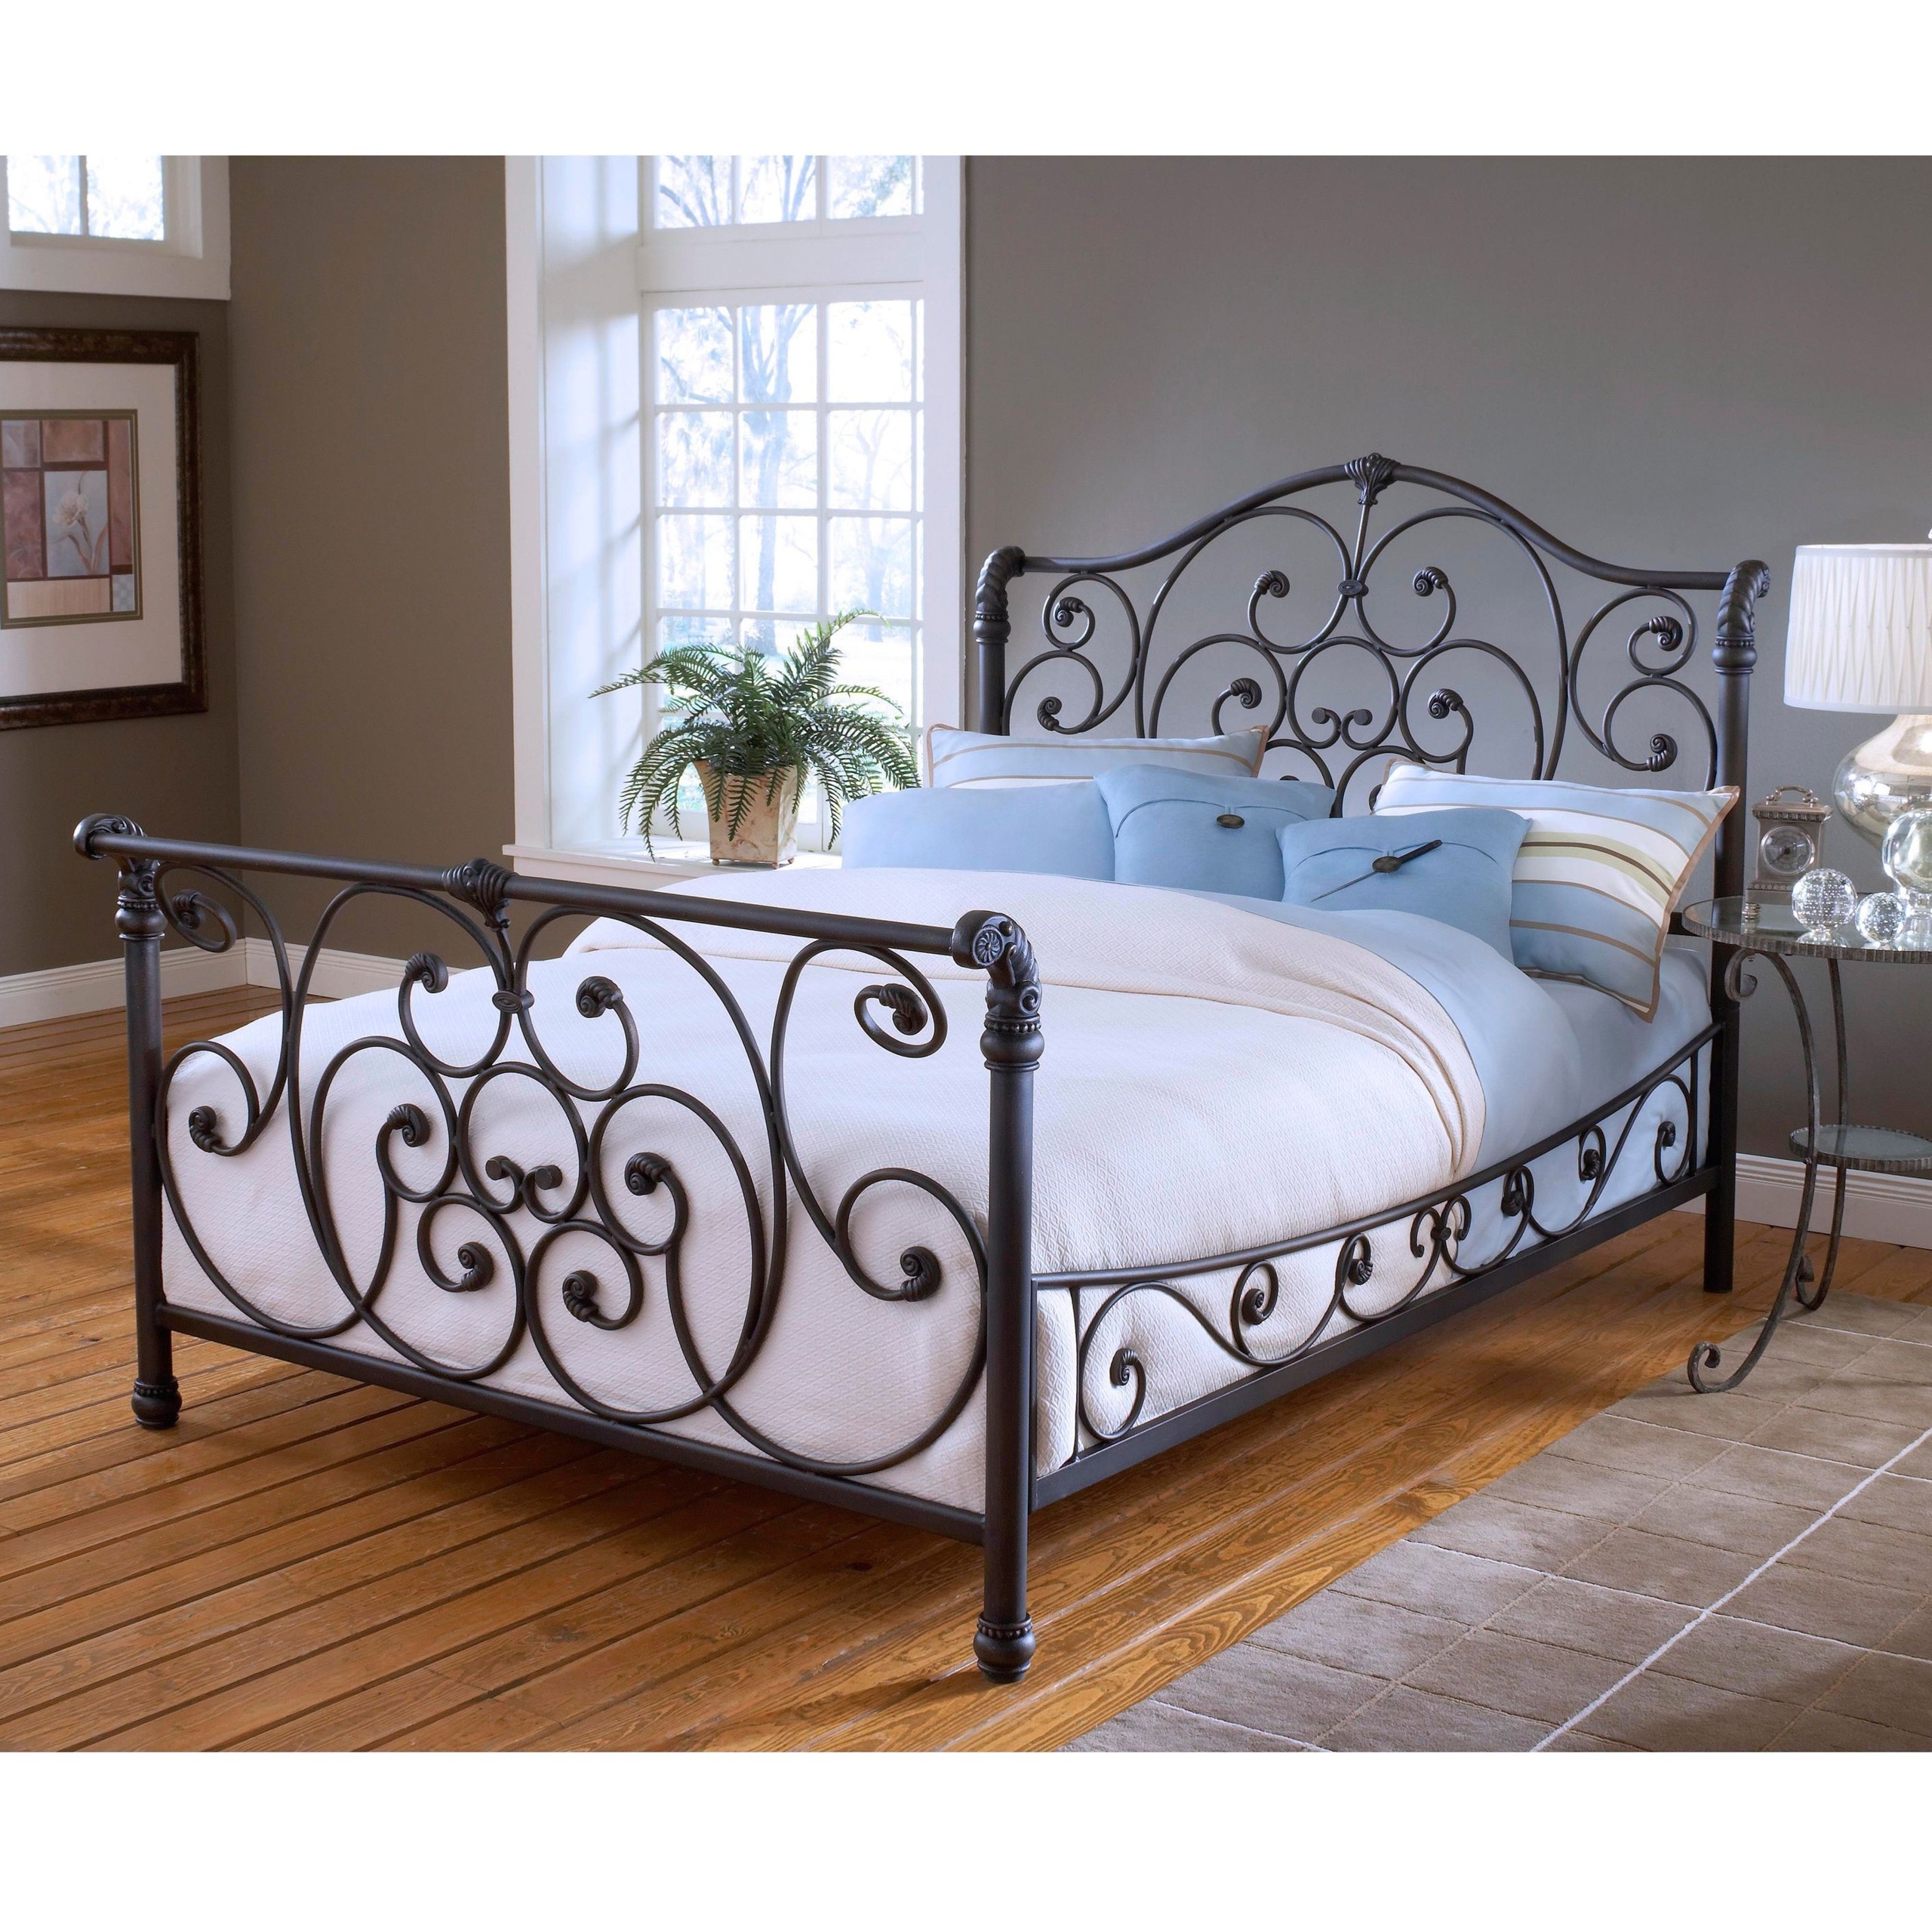 Hillsdale iron beds